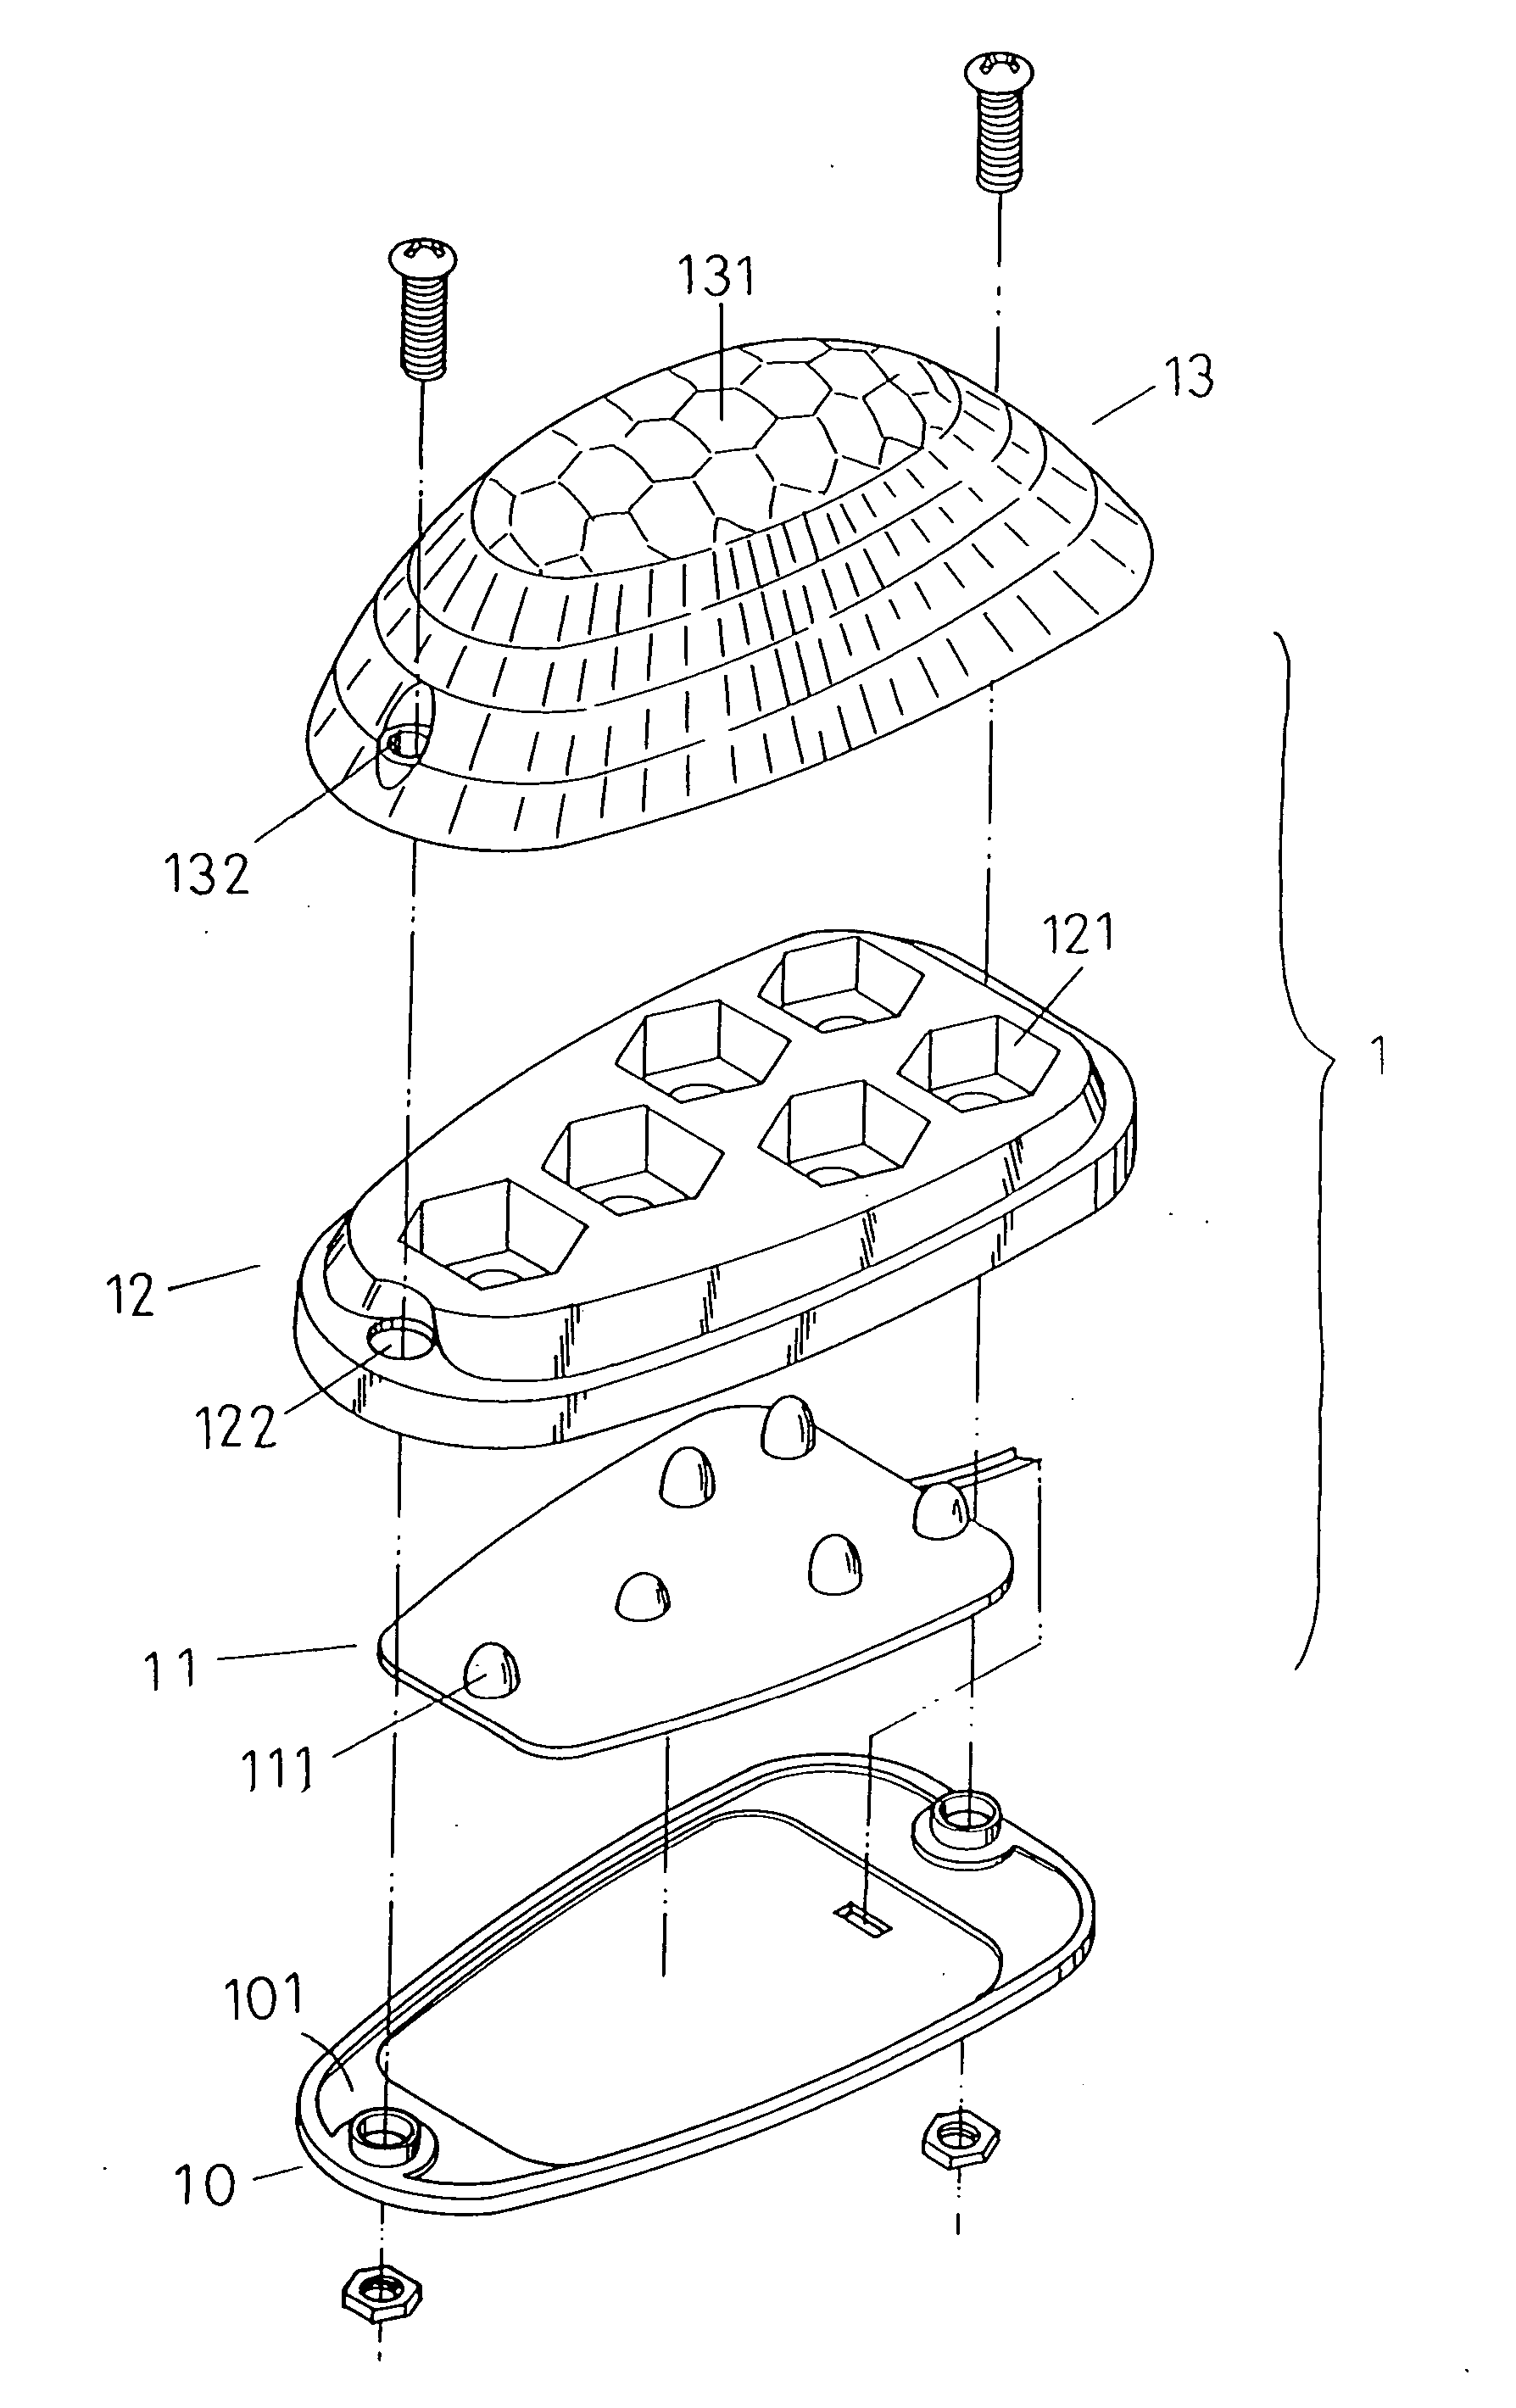 Turn signal light using light-emitting diodes as light sources